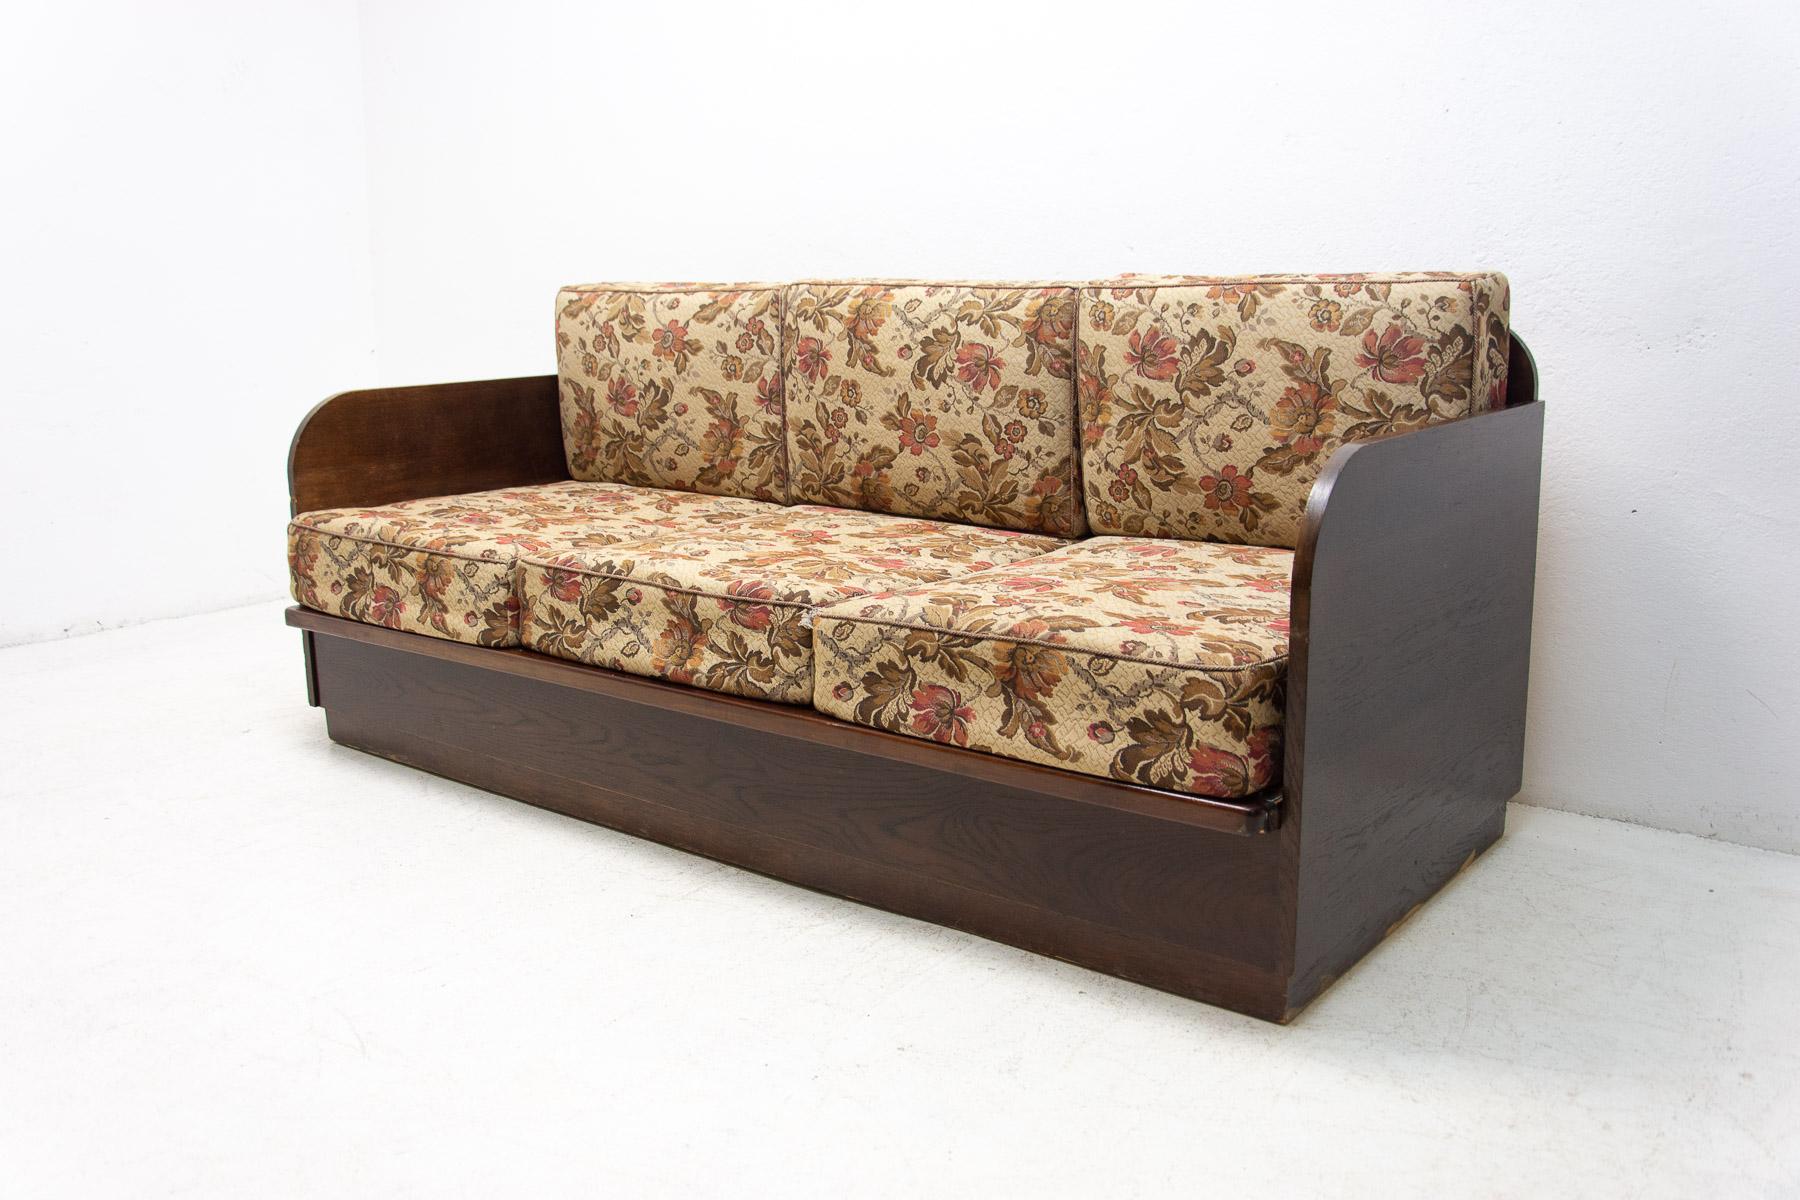 This folding sofabed was made in the former Czechoslovakia in the 1950´s. The construction is of wood and it´s veneered with dark stained beech wood.

Overall in good Vintage condition, showing signs of age and using(a few small scuffs on the